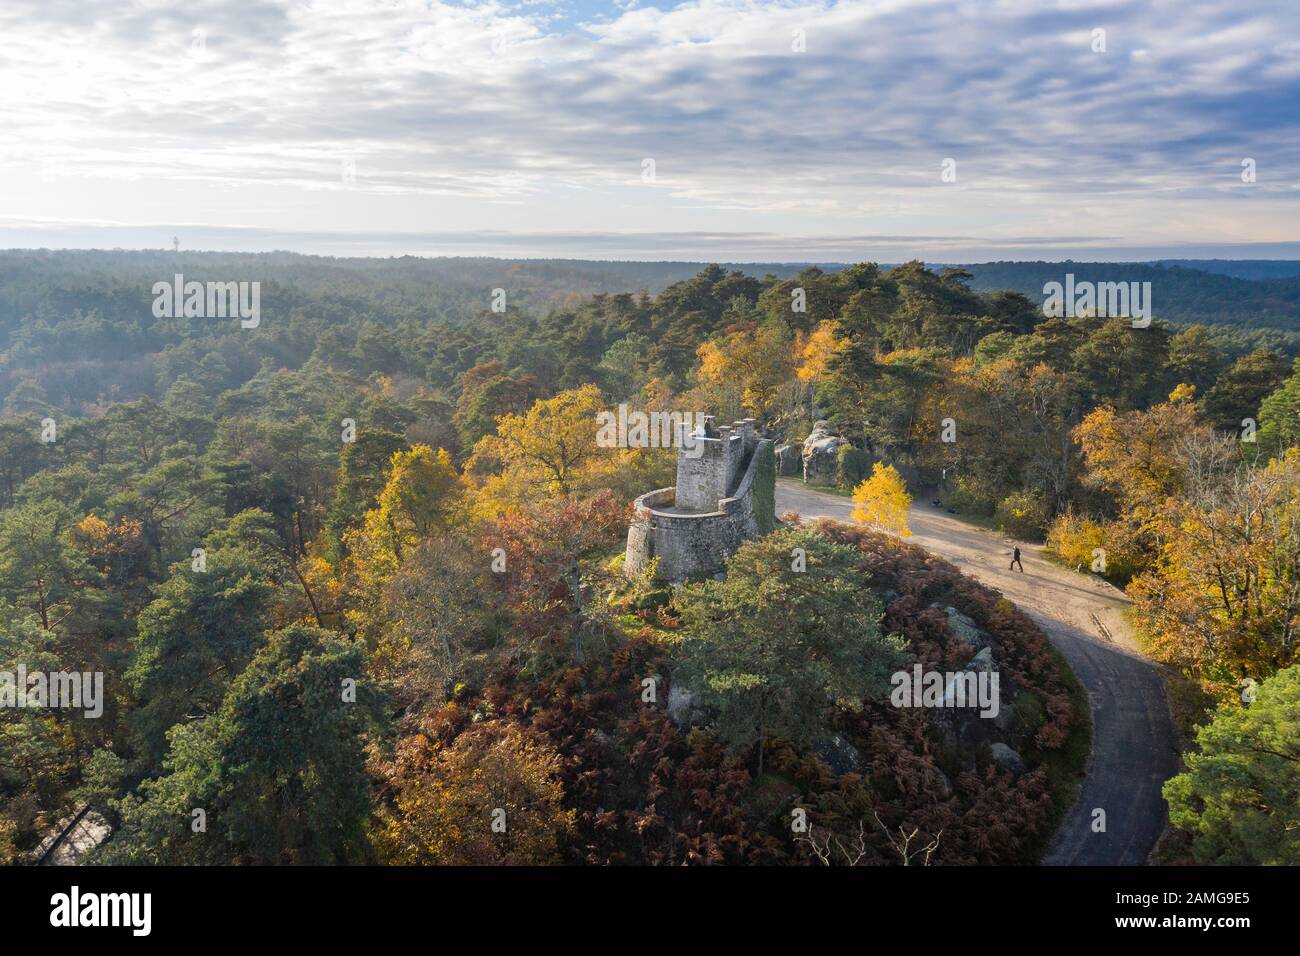 France, Seine et Marne, Fontainebleau, Fontainebleau forest, Fontainebleau and Gatinais Biosphere Reserve by UNESCO, the Denecourt Tower in autumn (ae Stock Photo